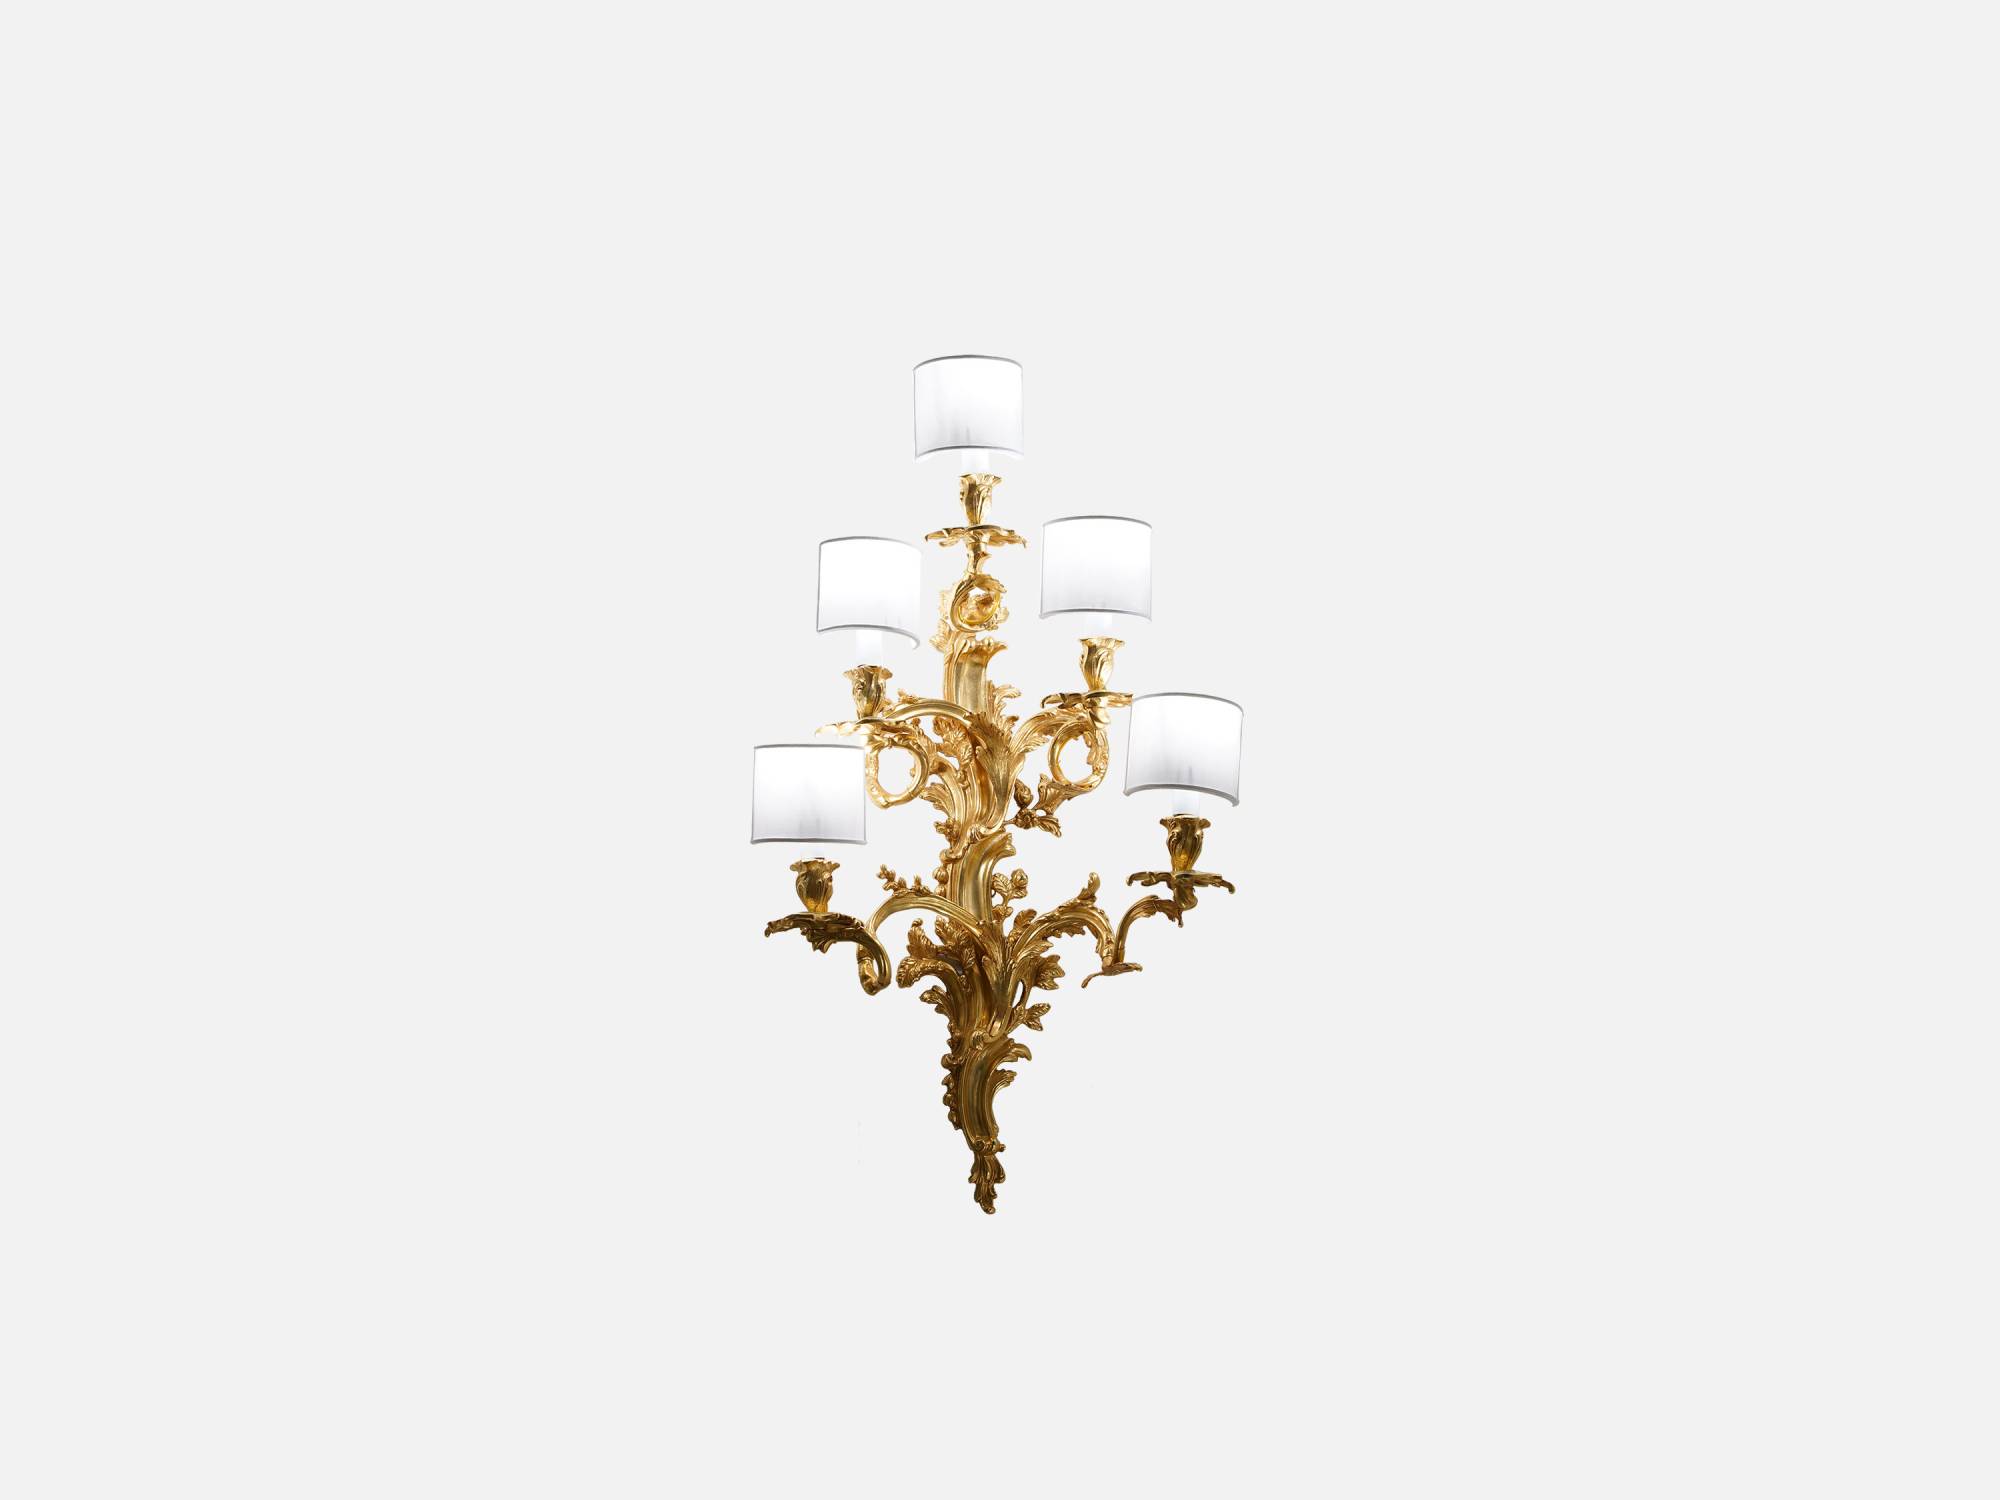 ART. 2060-1 - C.G. Capelletti quality furniture with made in Italy contemporary Lighting